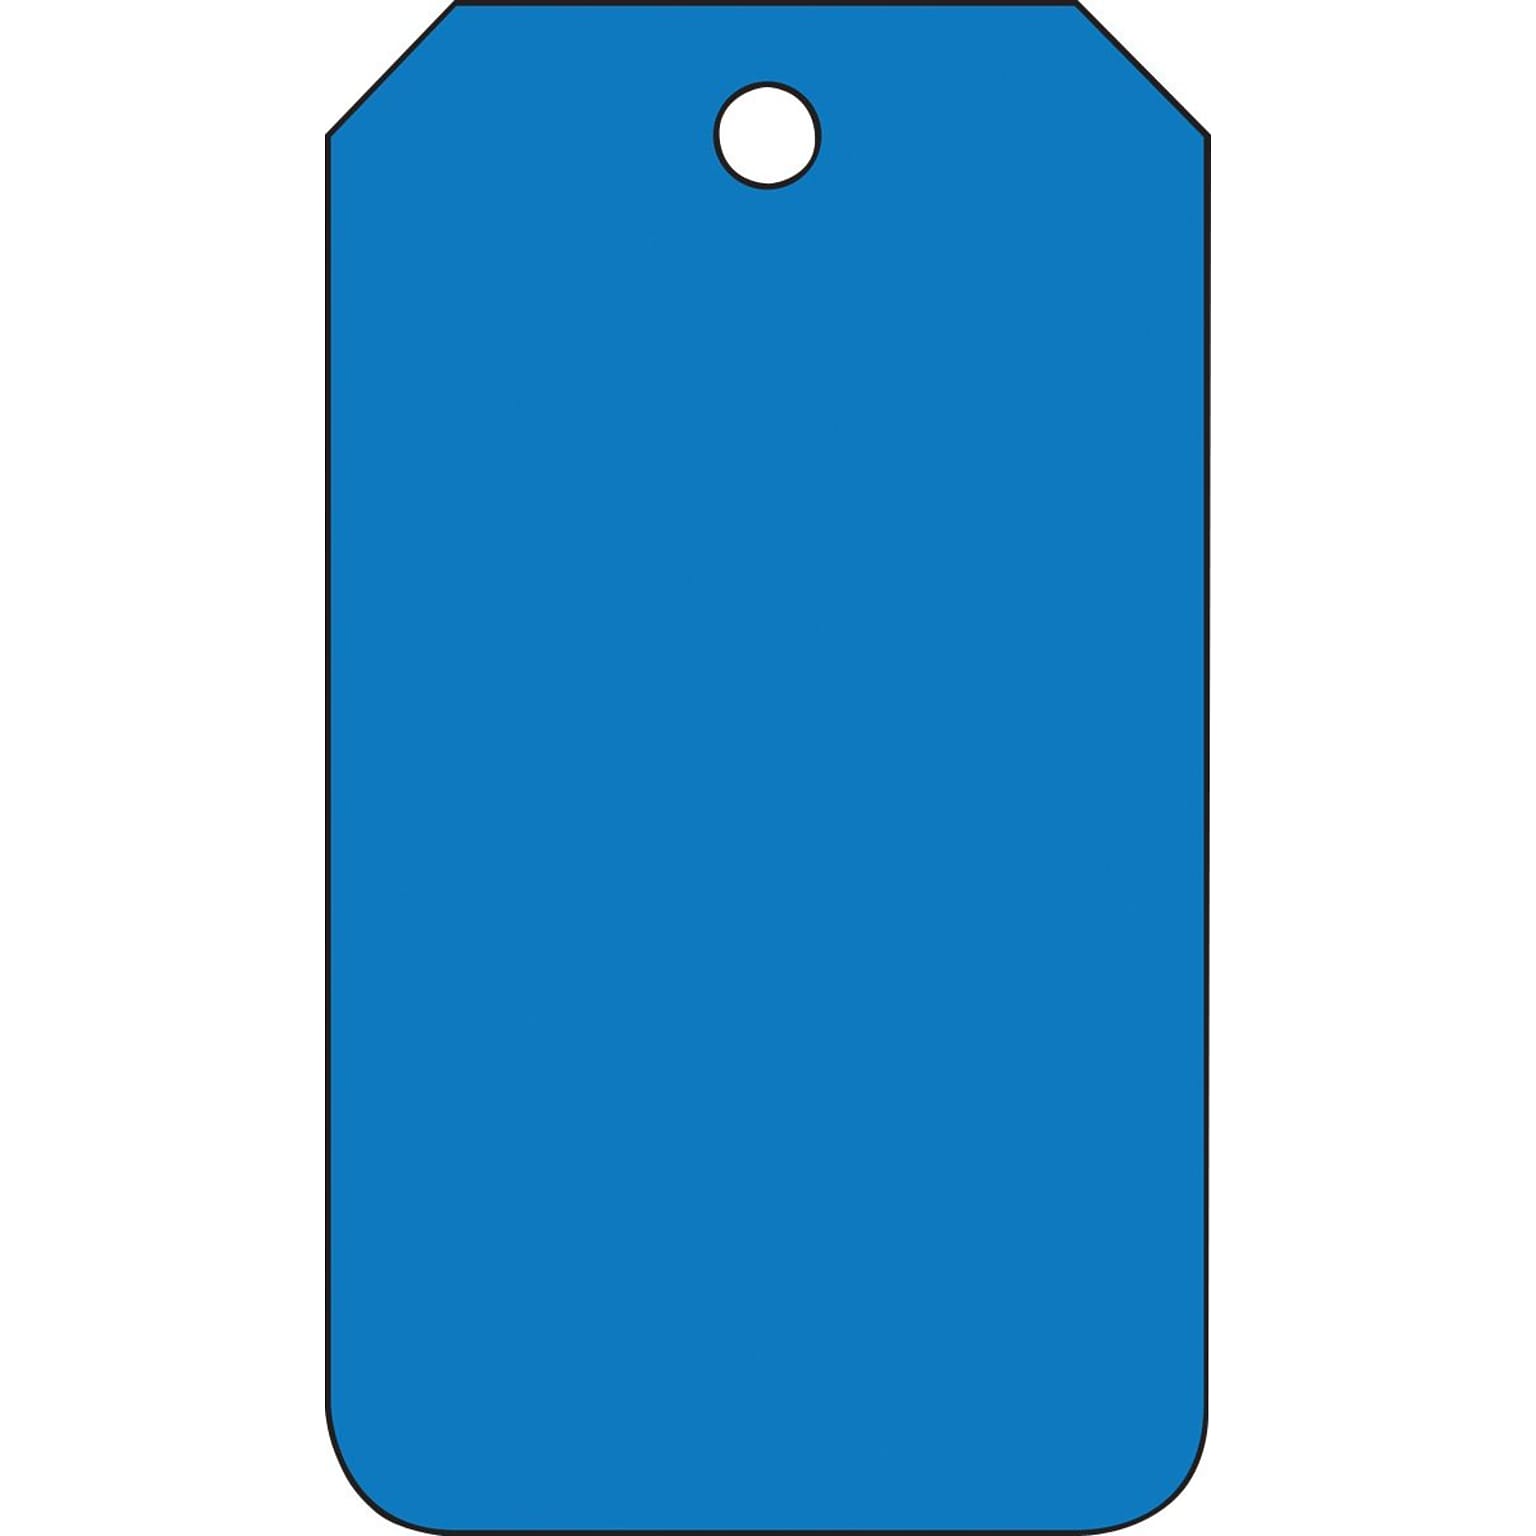 Accuform Solid Color Blank Tag, Blue, 5 3/4 x 3 1/4, PF-Cardstock, 25/Pack (MDT526CTP)